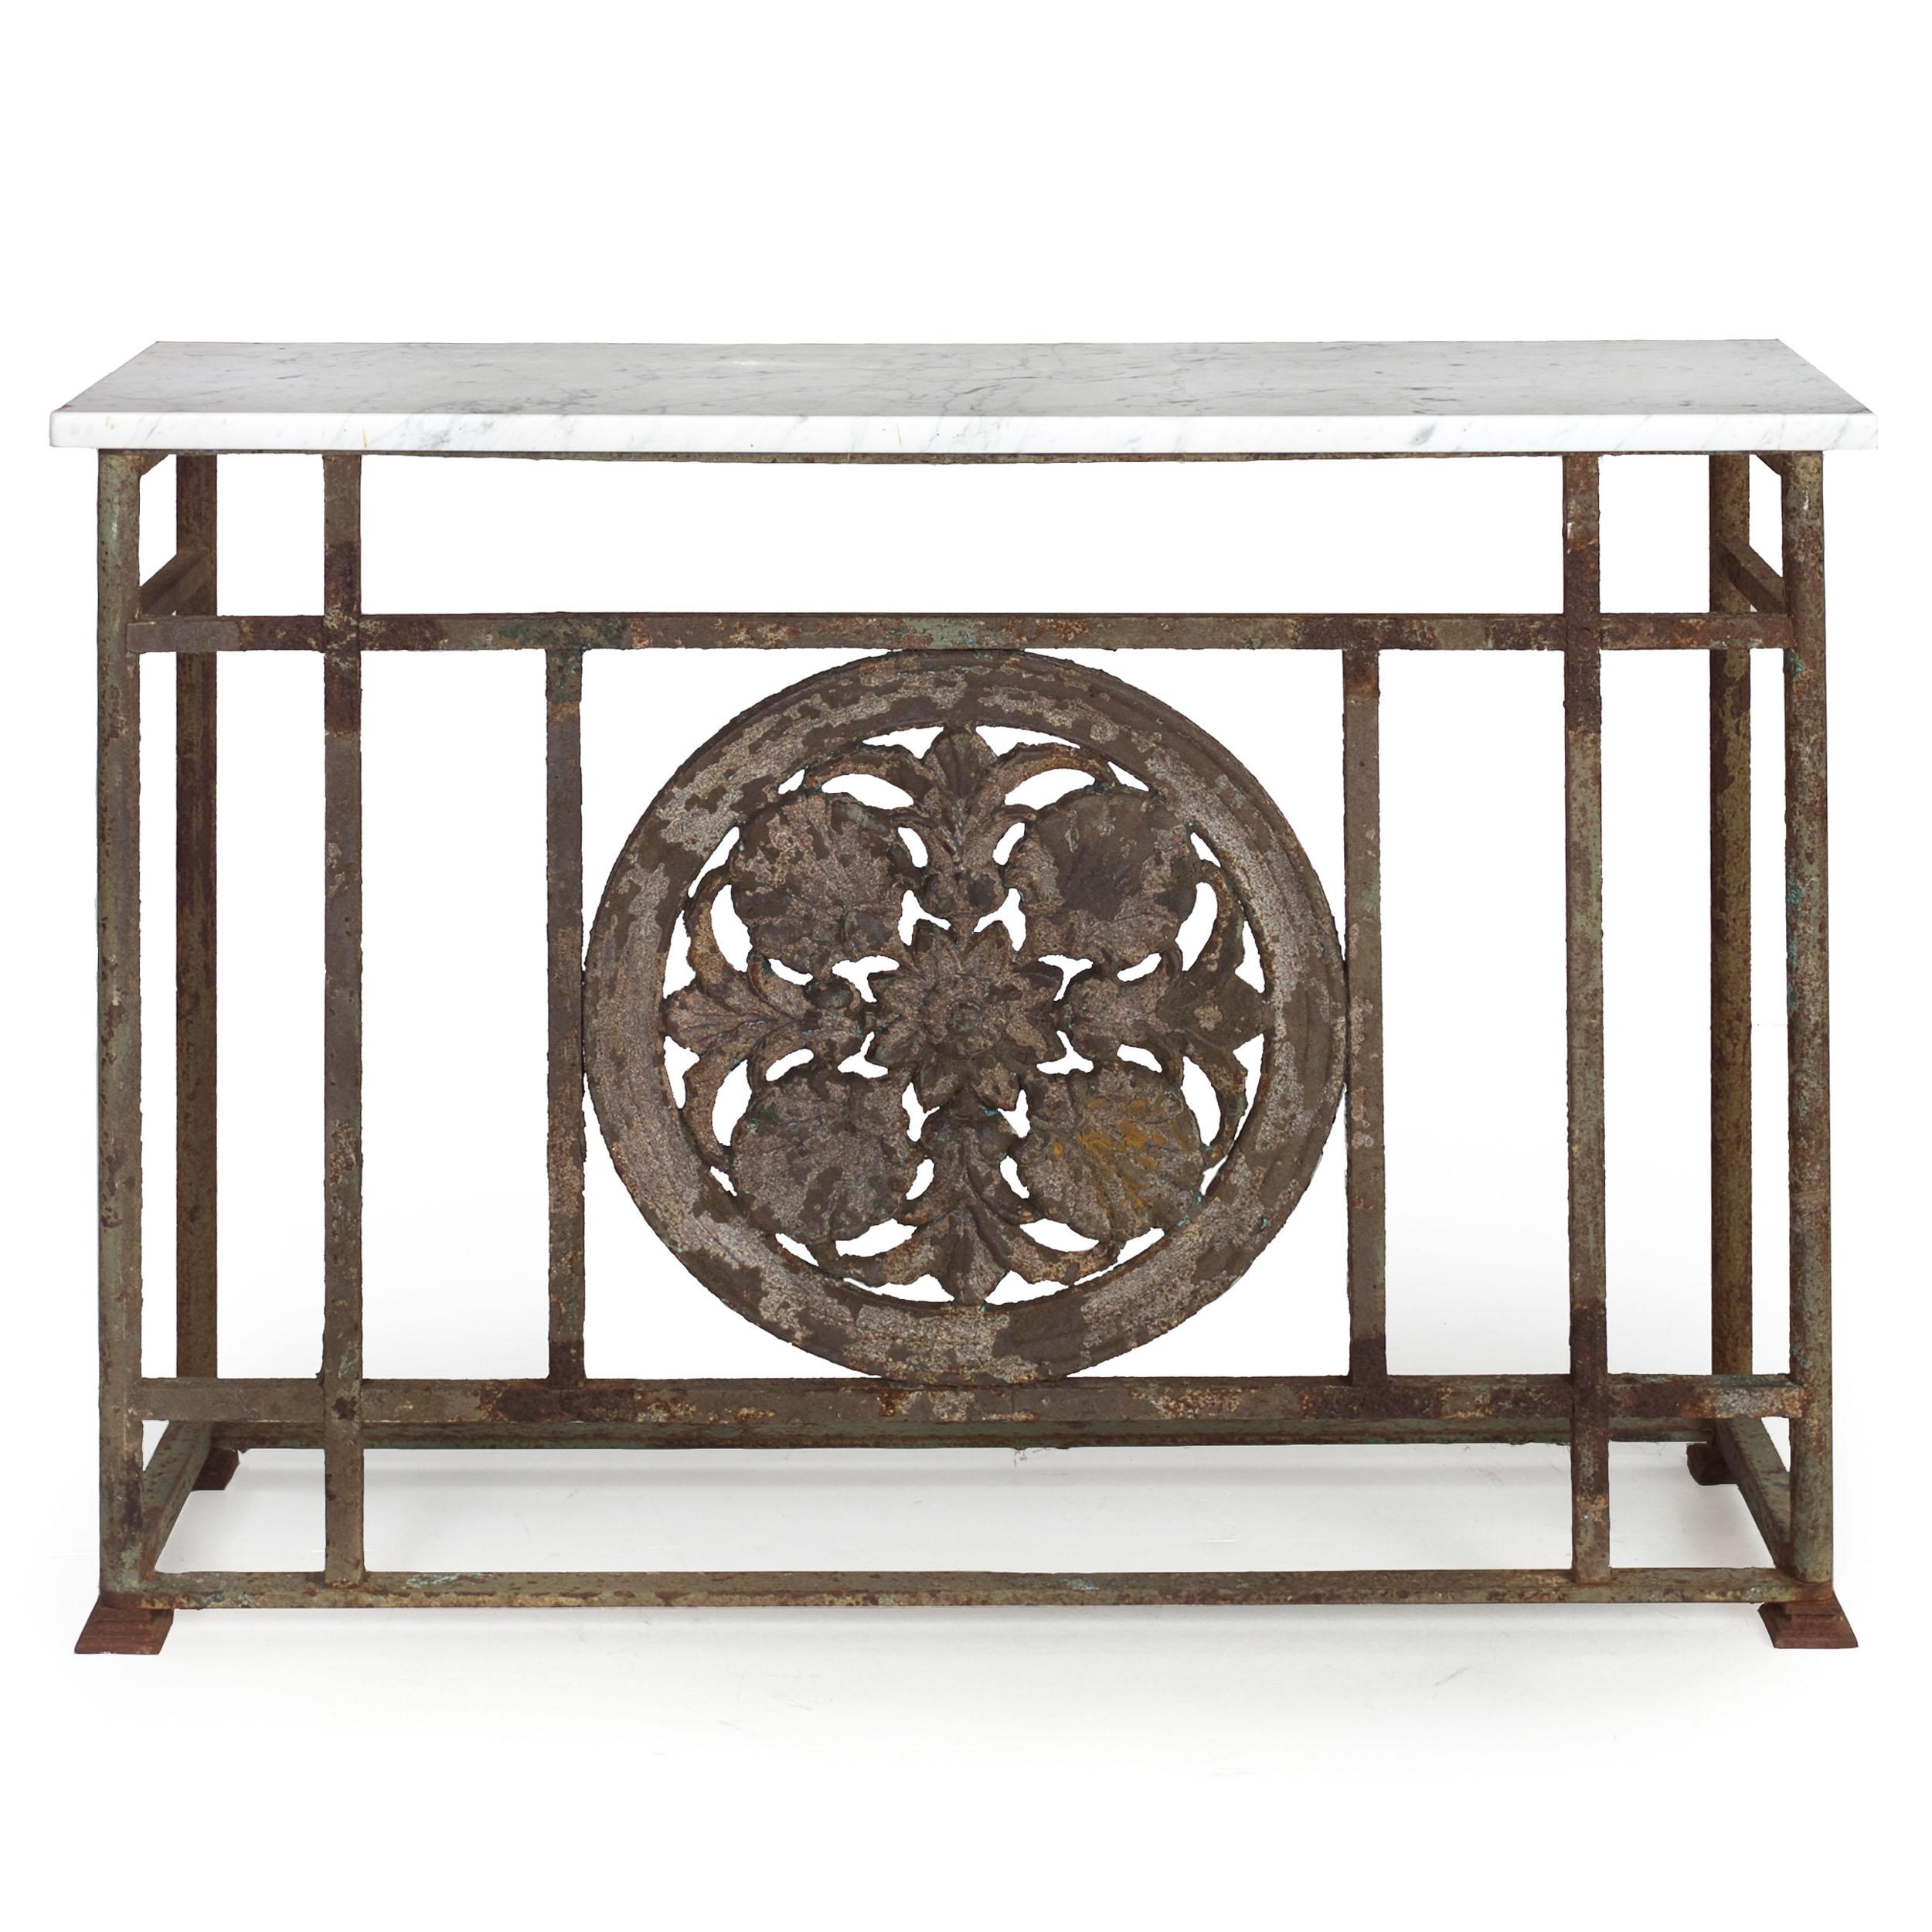 Rich with texture and chaotic color, this wonderful selection of iron-work features a crafty construction that minimizes the use of welds in favor of pinned tenon joints. An angular and austere form, the marble top is plain with squared edges and